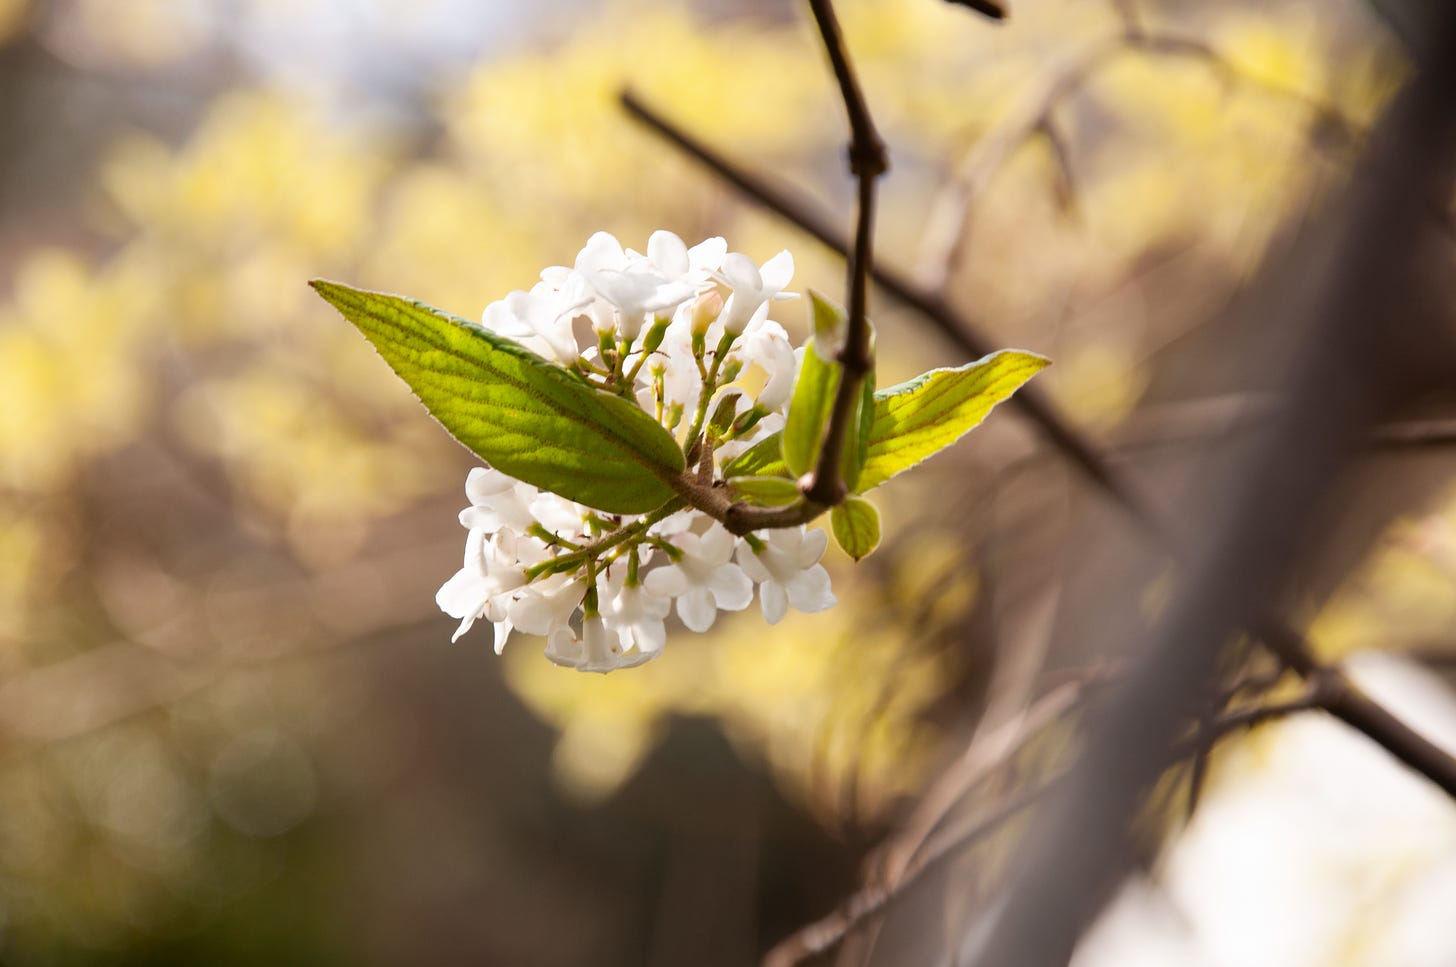 An image of a tree branch with a head of white blossom and green leaves. The background is blurred, showing just hints of yellow flowers.